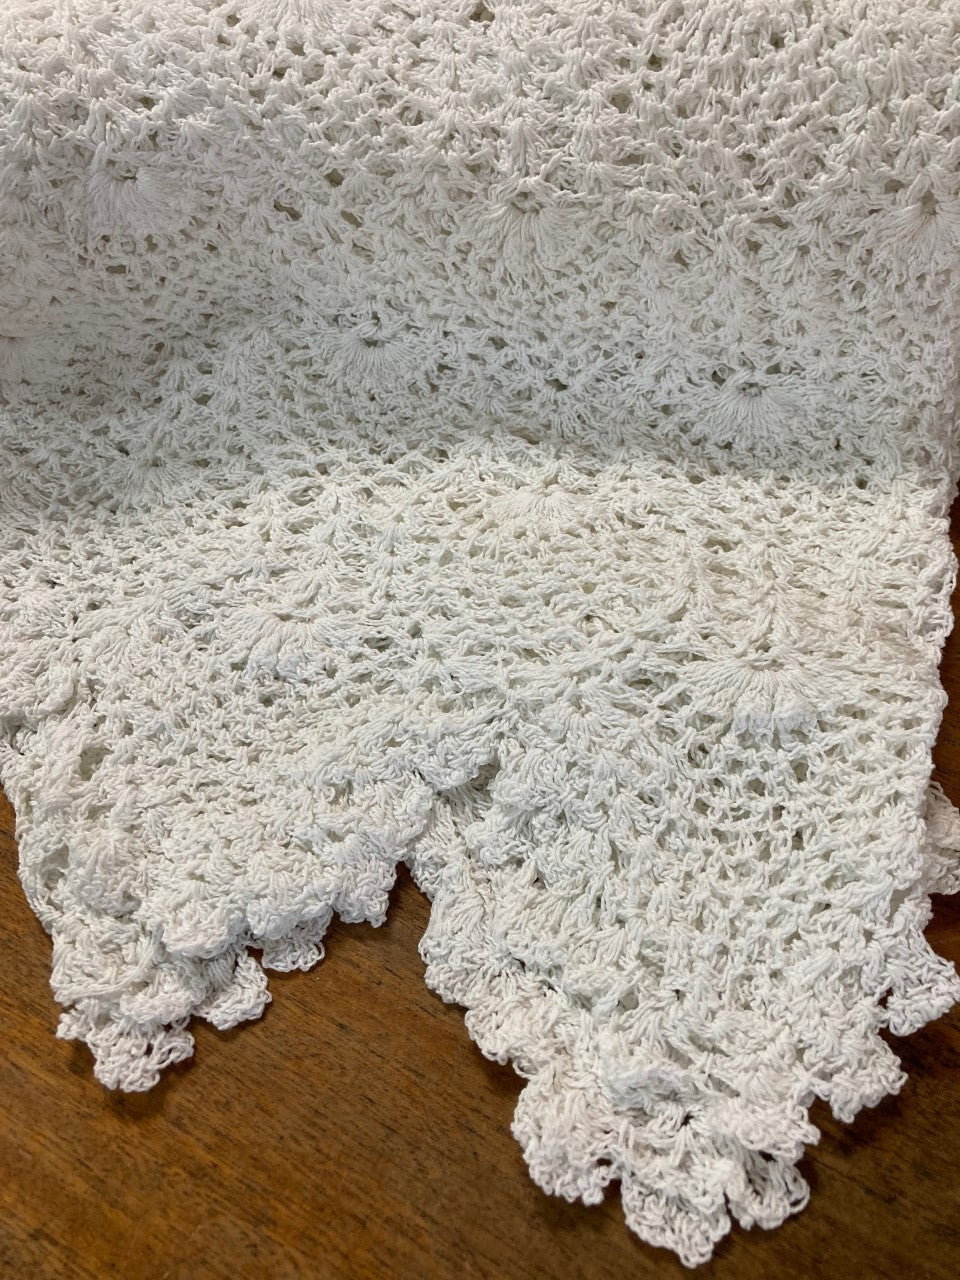 Hand Crochet Lace Tablecloth 90" Round White 100% Cotton Luxury